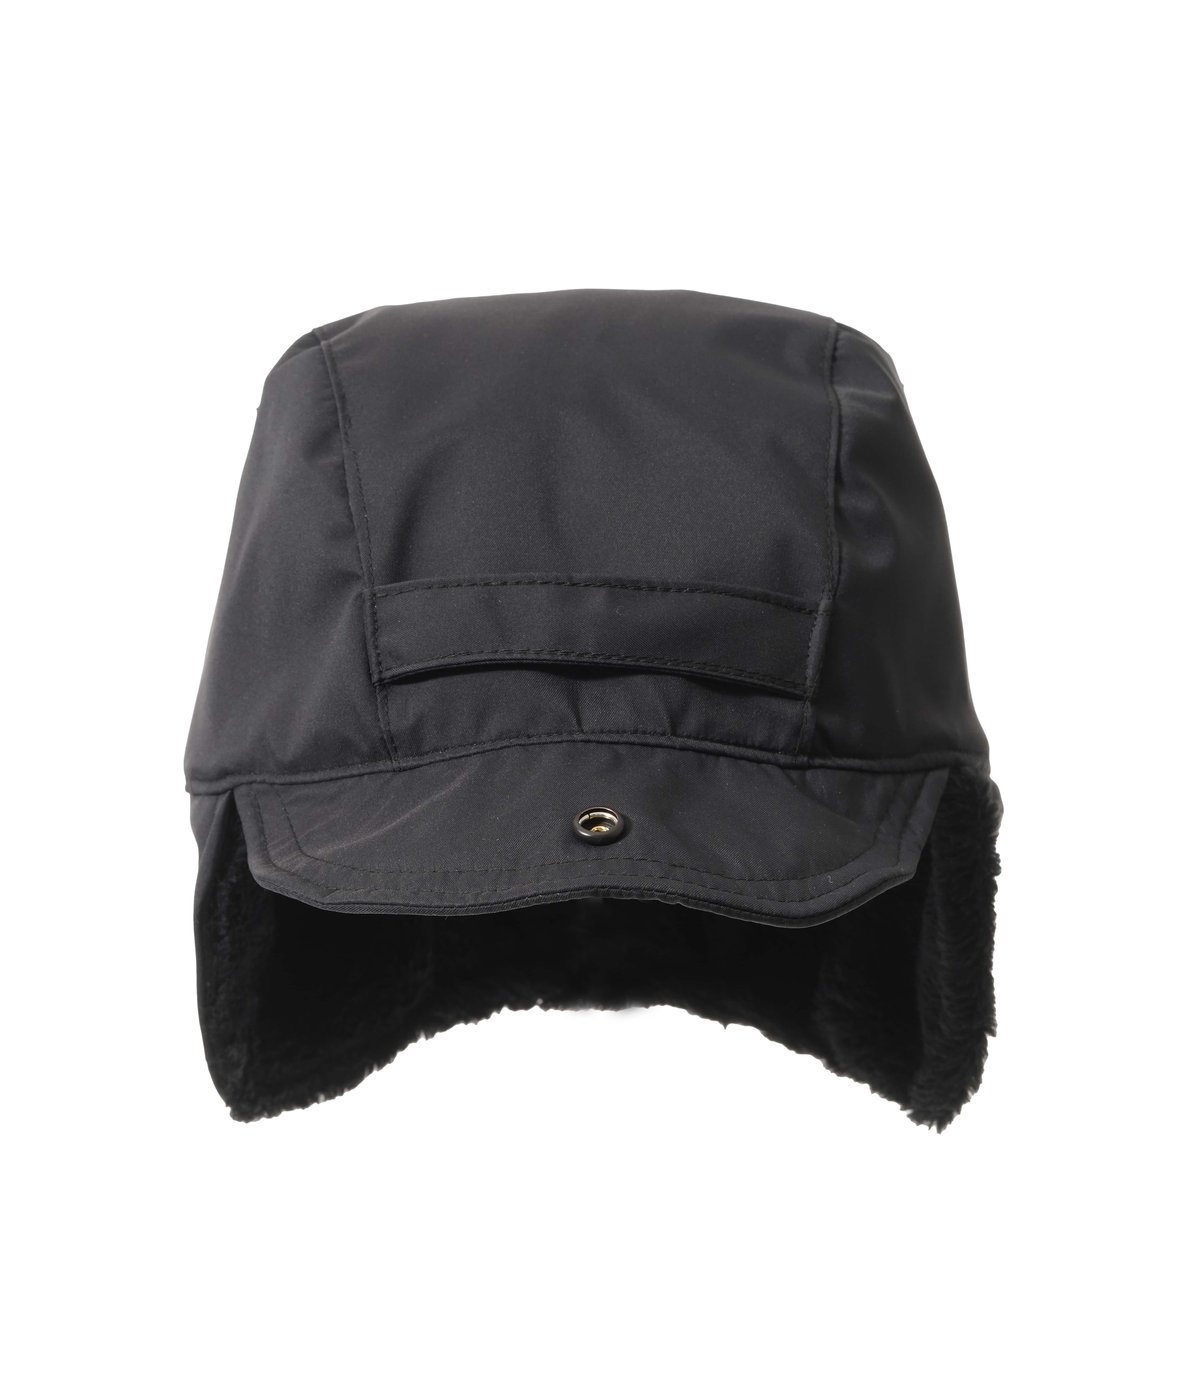 MOUT COLD WEATHER MOUNTAIN CAP | MOUT RECON TAILOR(マウトリーコン 